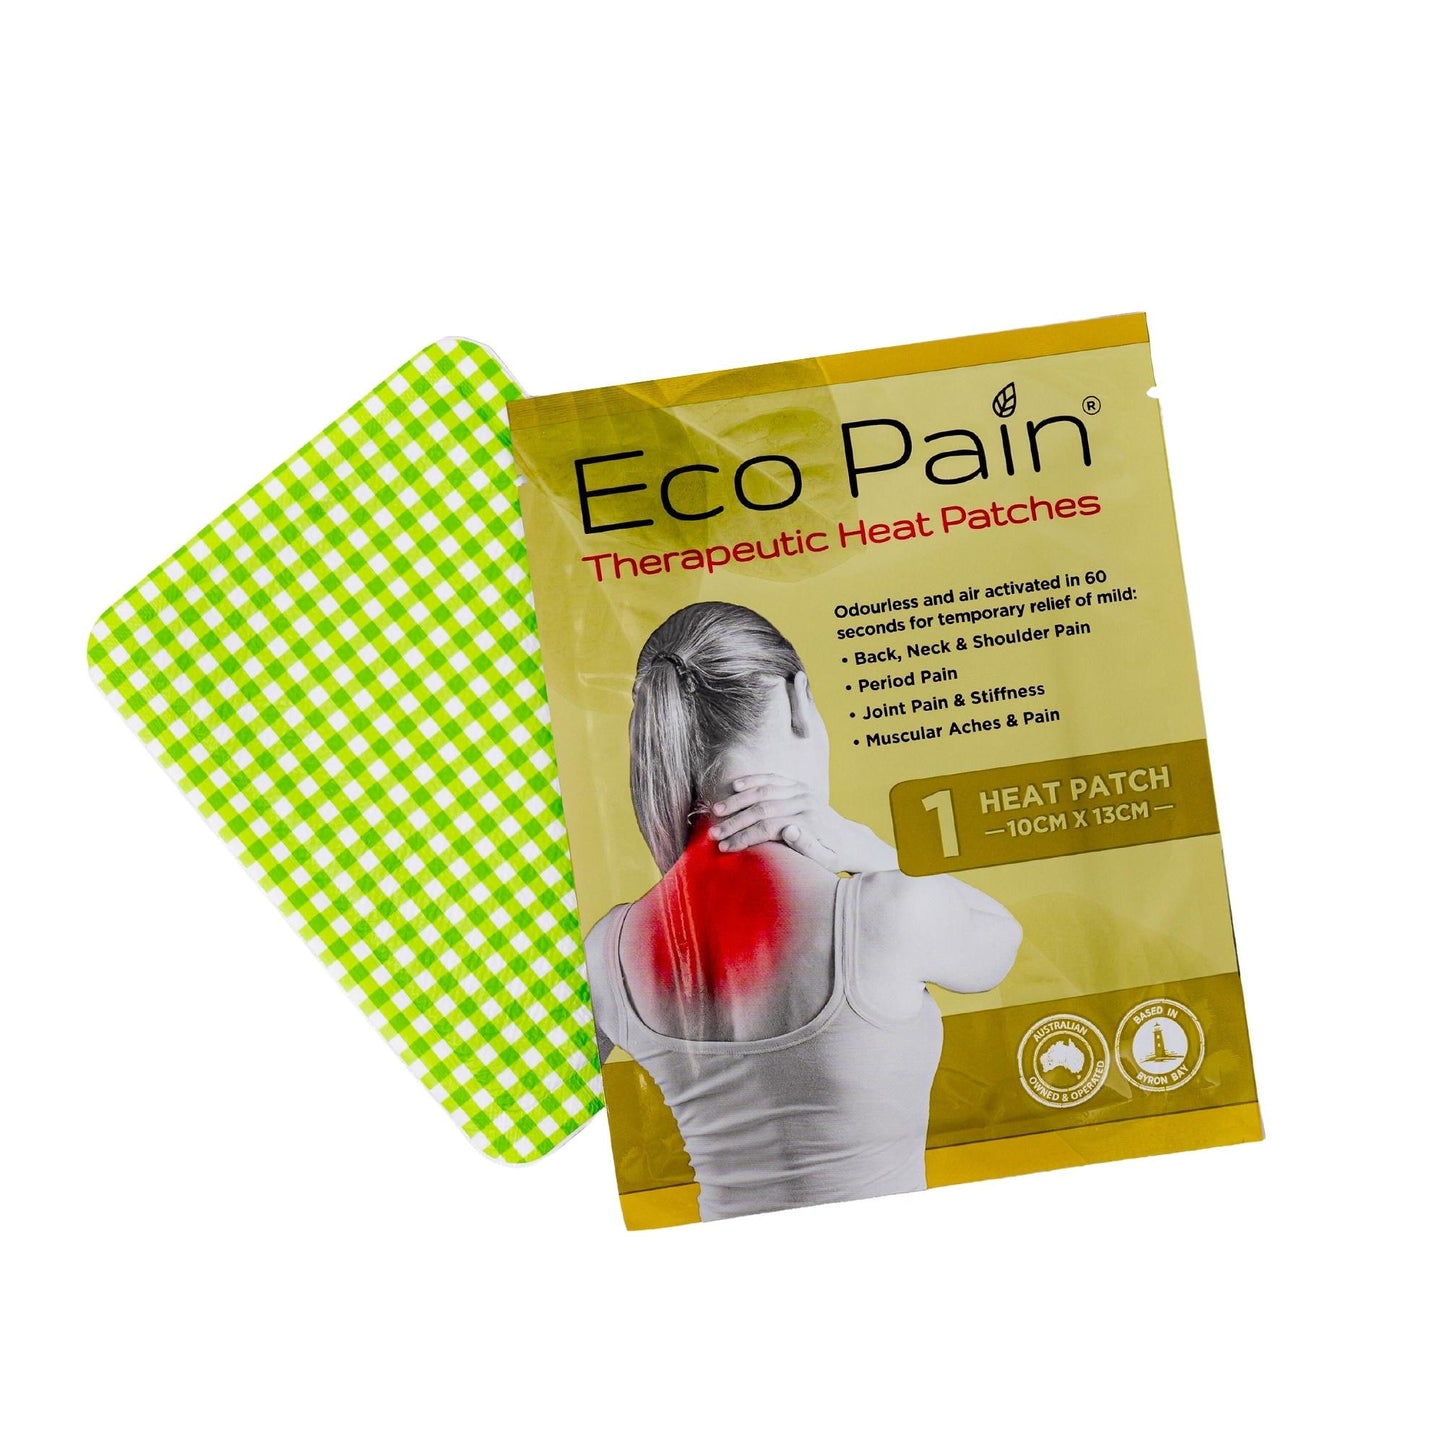 Eco Pain Therapeutic Heat Patches